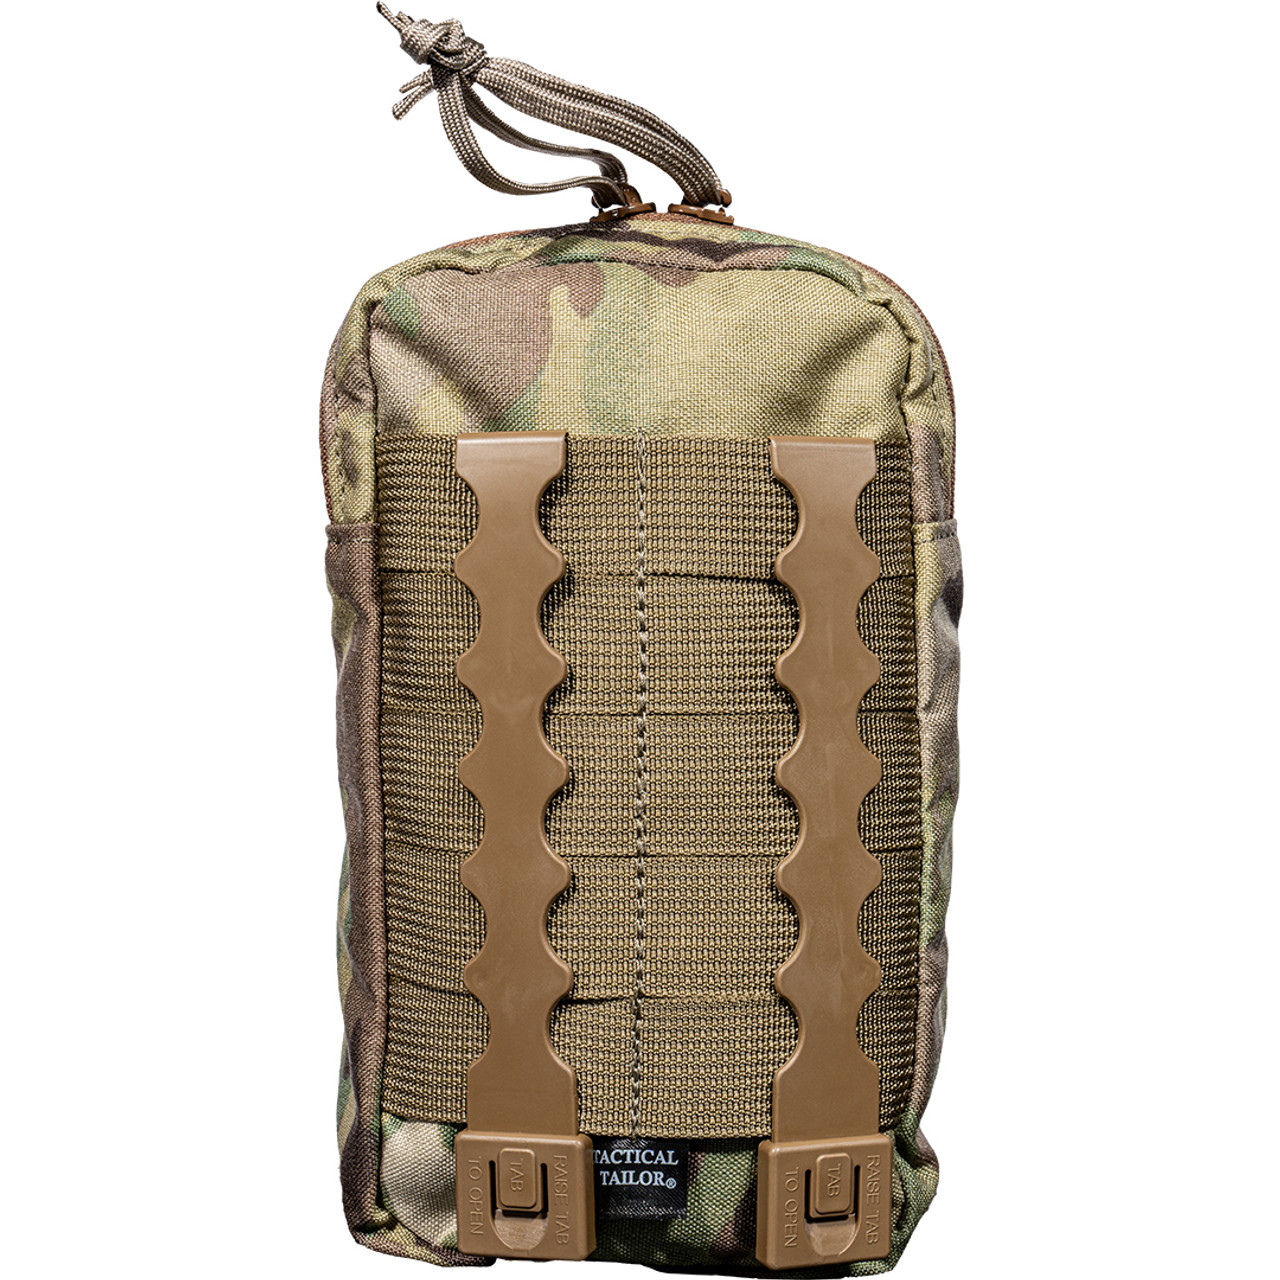  Tactical Tailor Fight Light Grenade Pouch : Sports & Outdoors